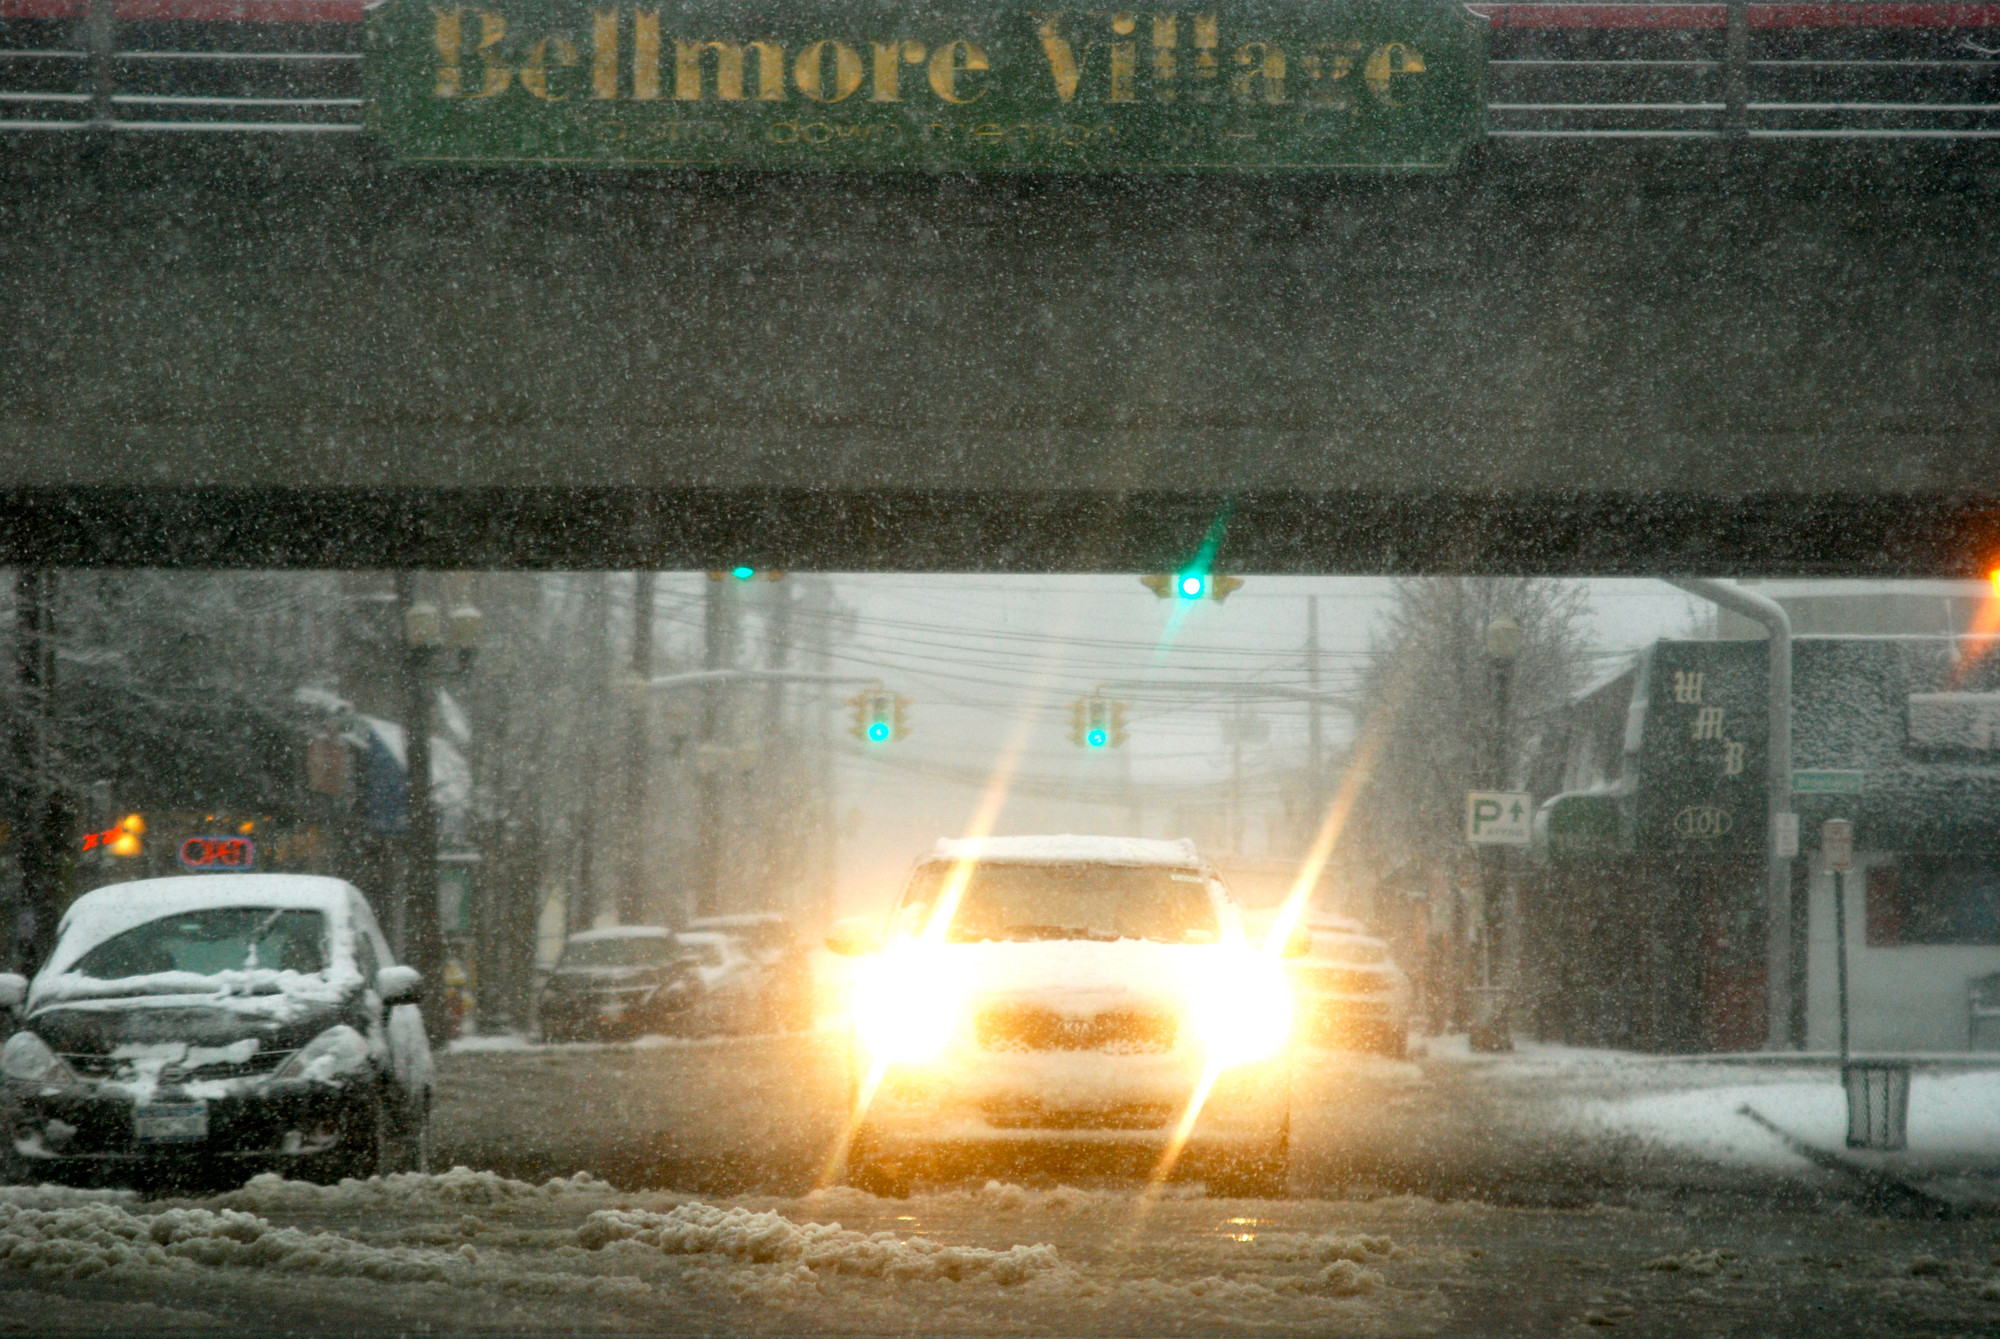 A view of downtown Bellmore, at Bedford Avenue and Sunrise Highway.